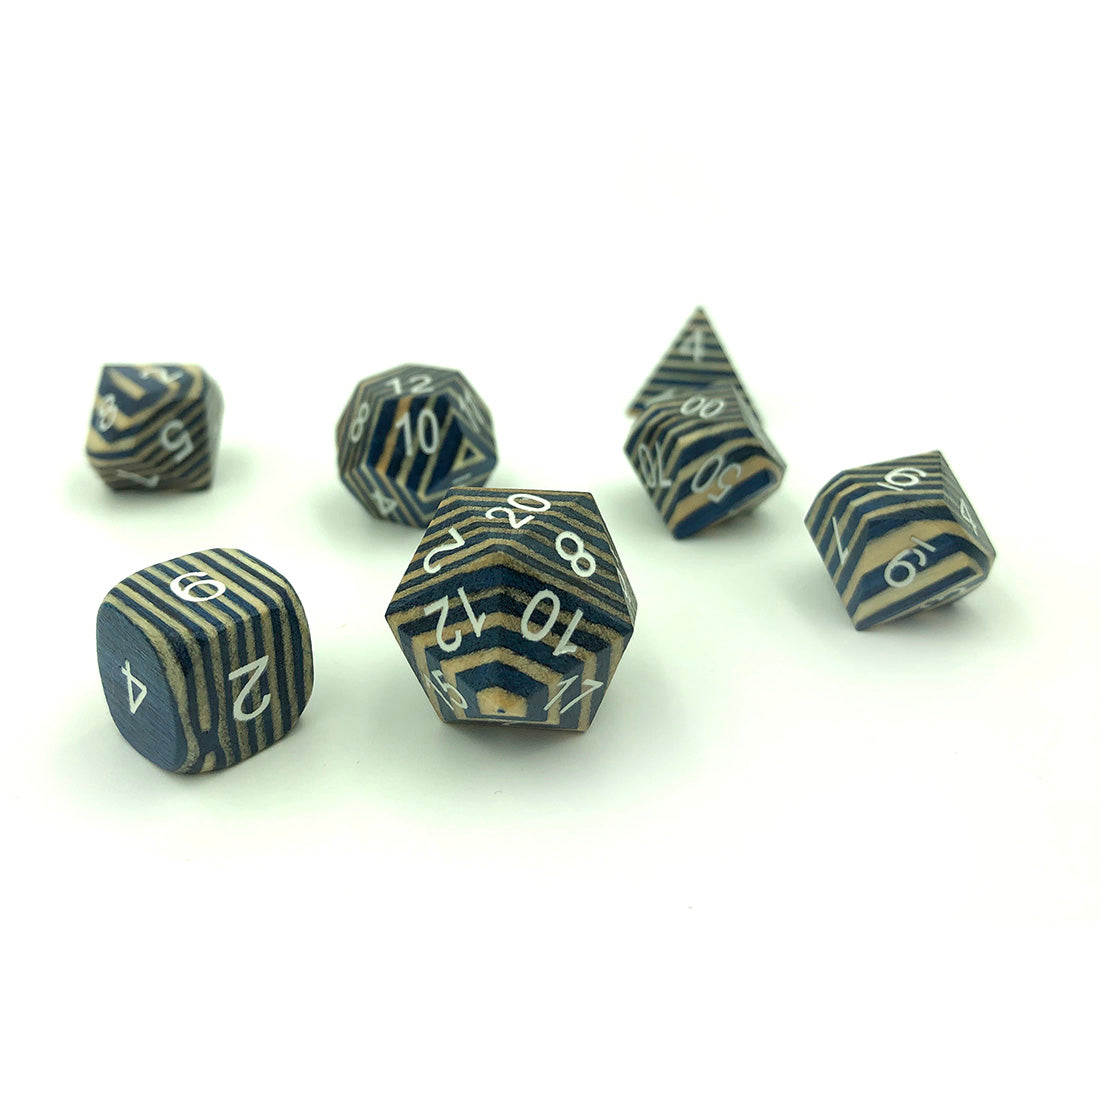 Blue & White Technical Wood Wooden Dice Set